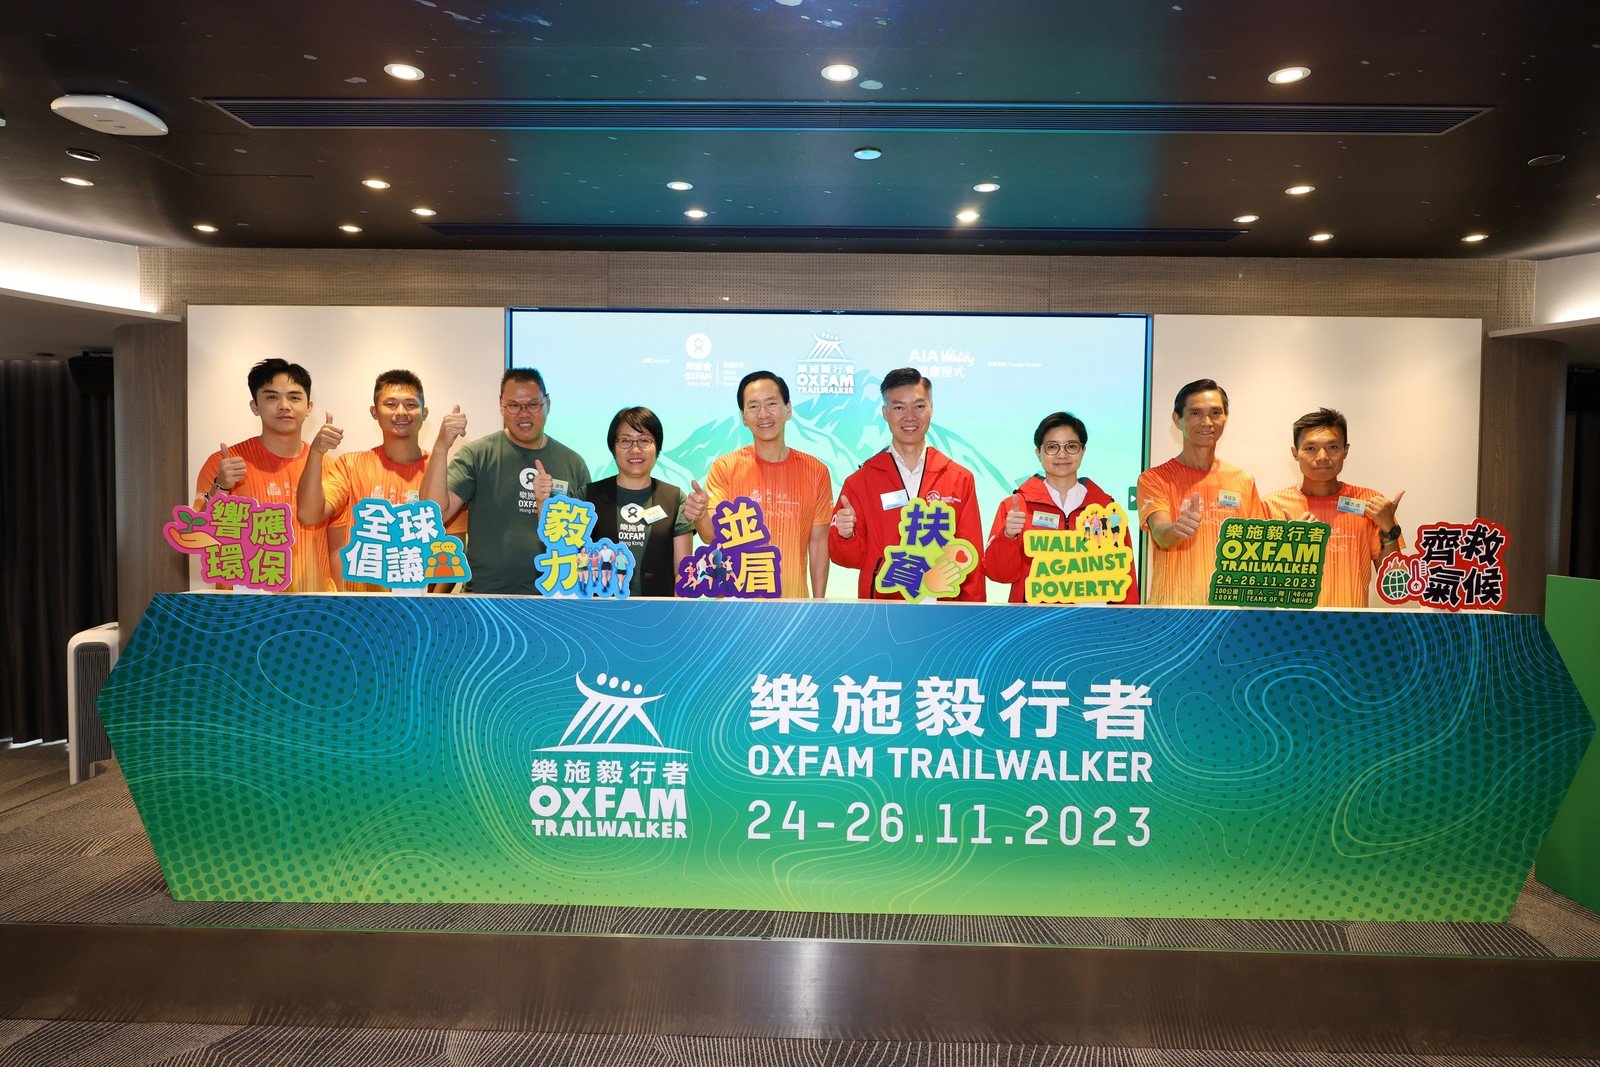 The guests joined the Oxfam Trailwalker press conference, which featured the theme: ‘Walk Against Poverty’.